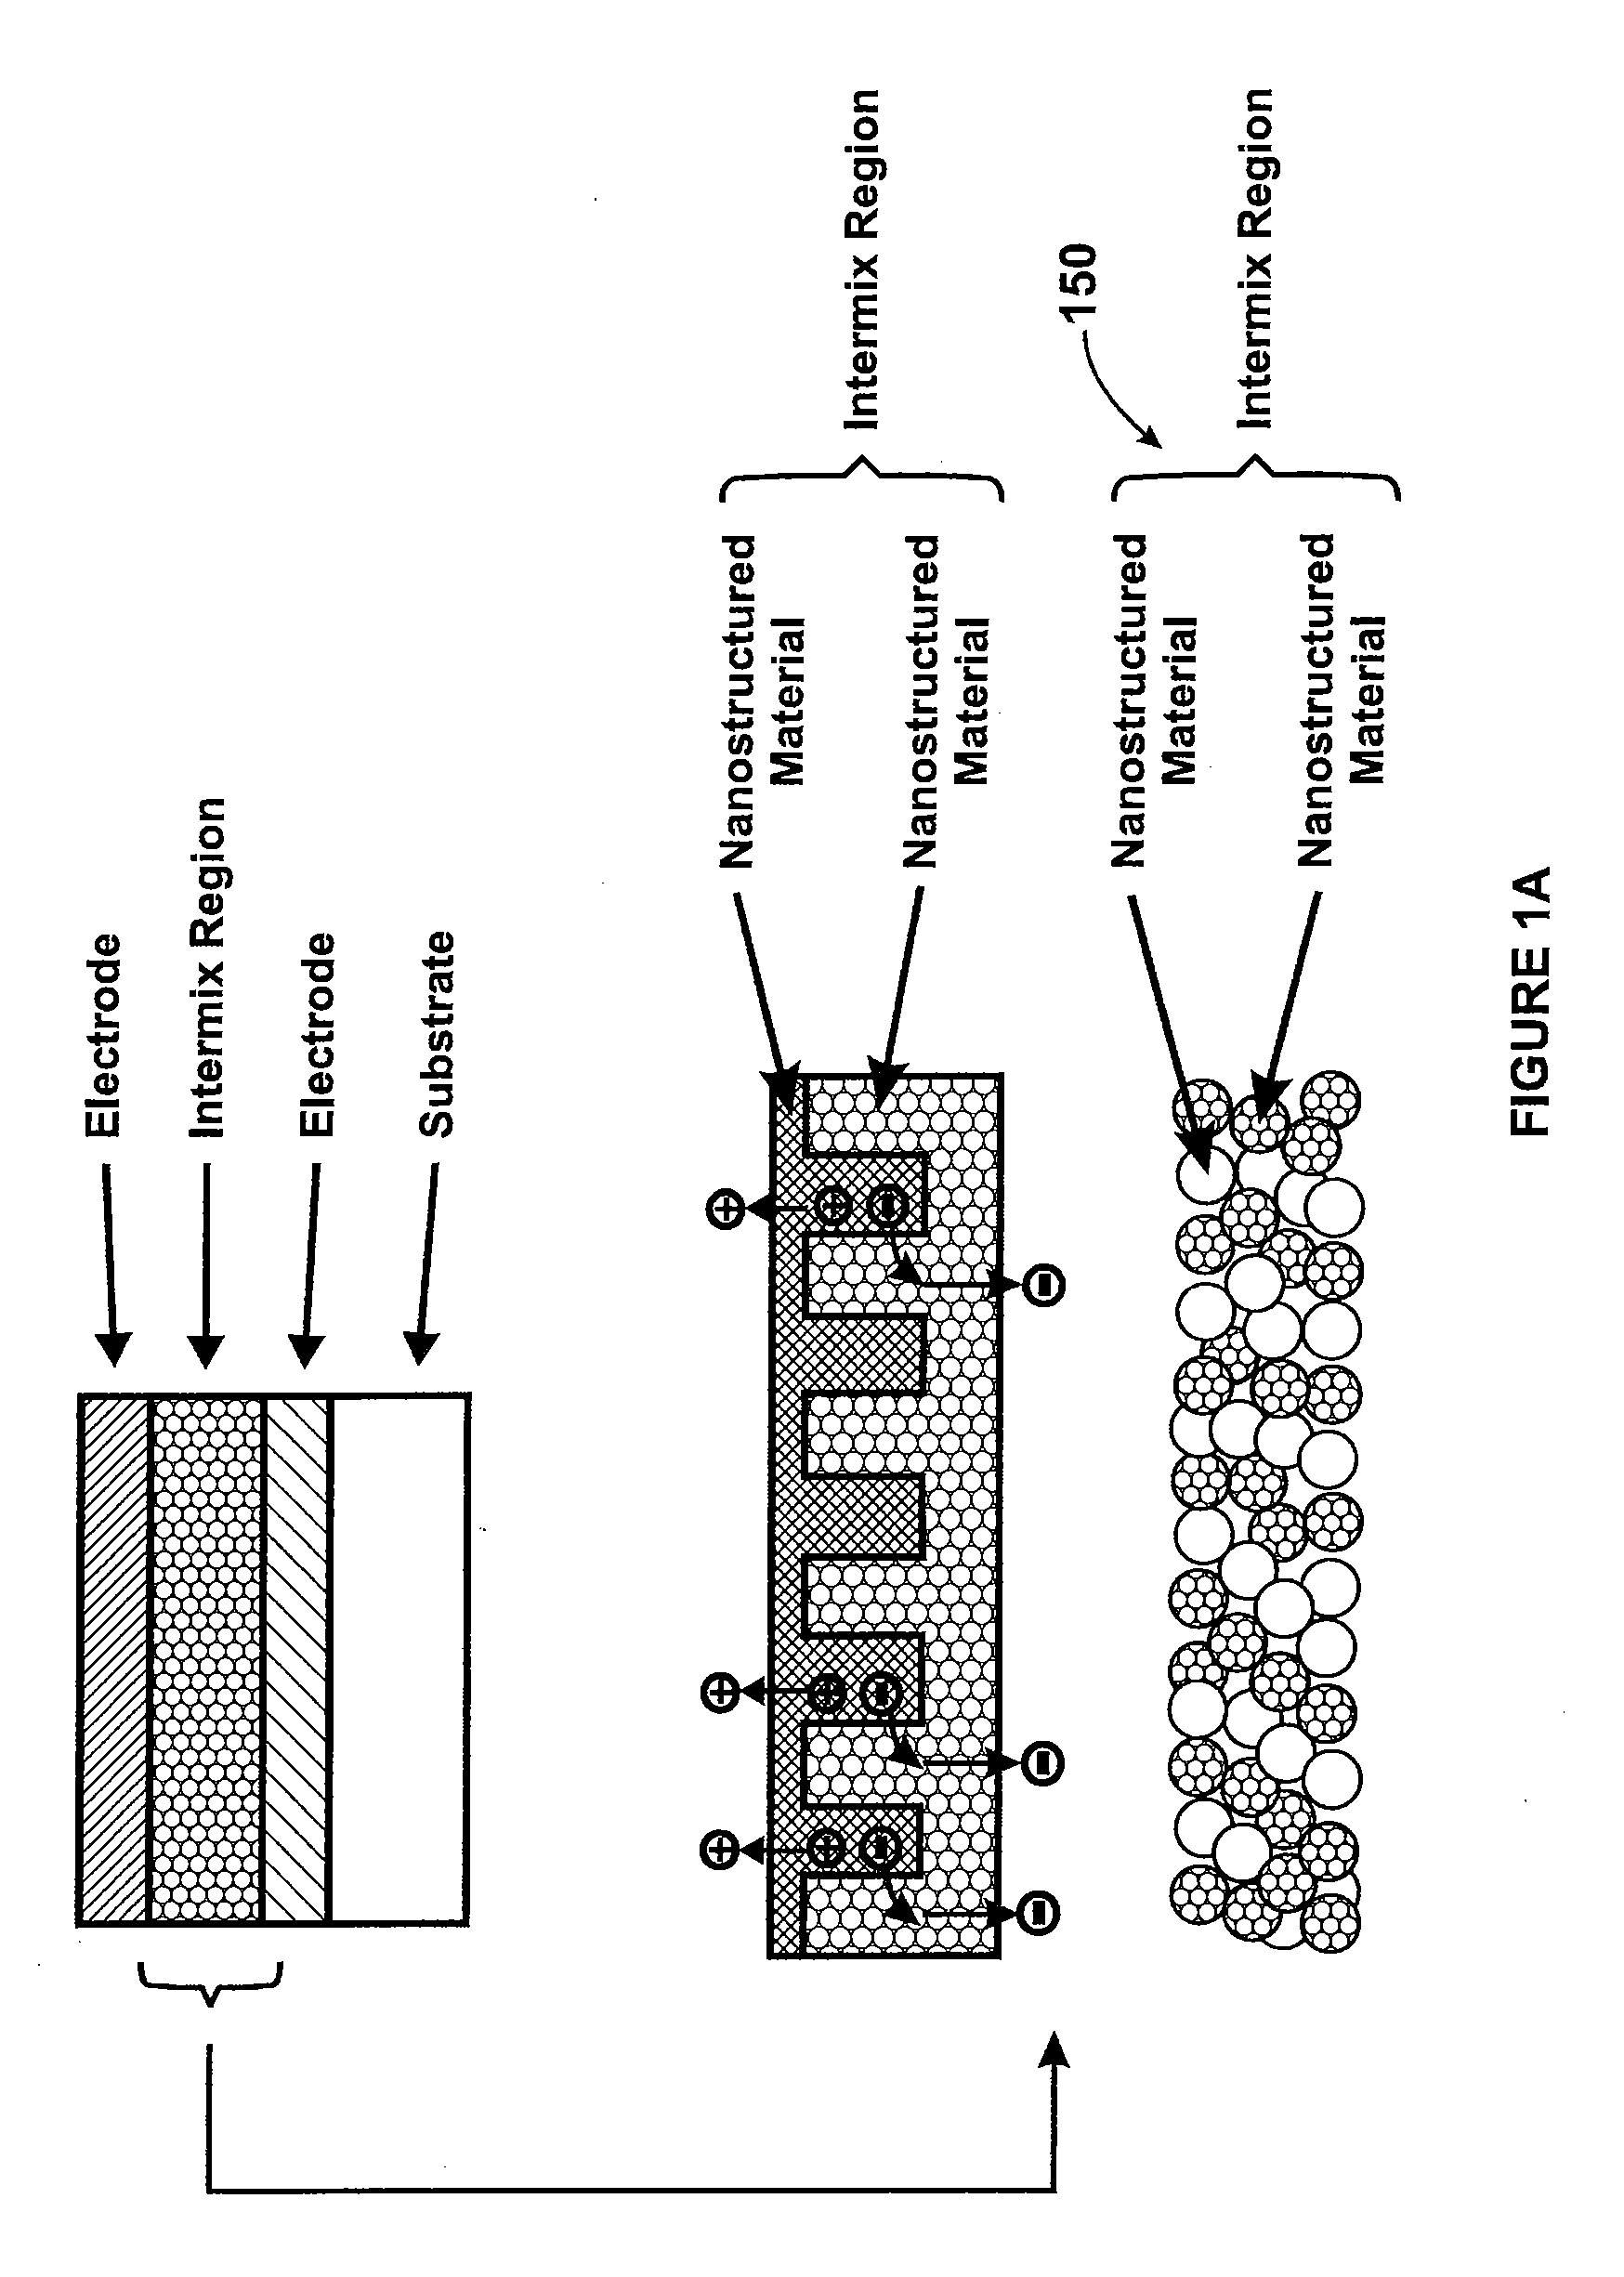 Method and structure for thin film photovoltaic materials using semiconductor materials